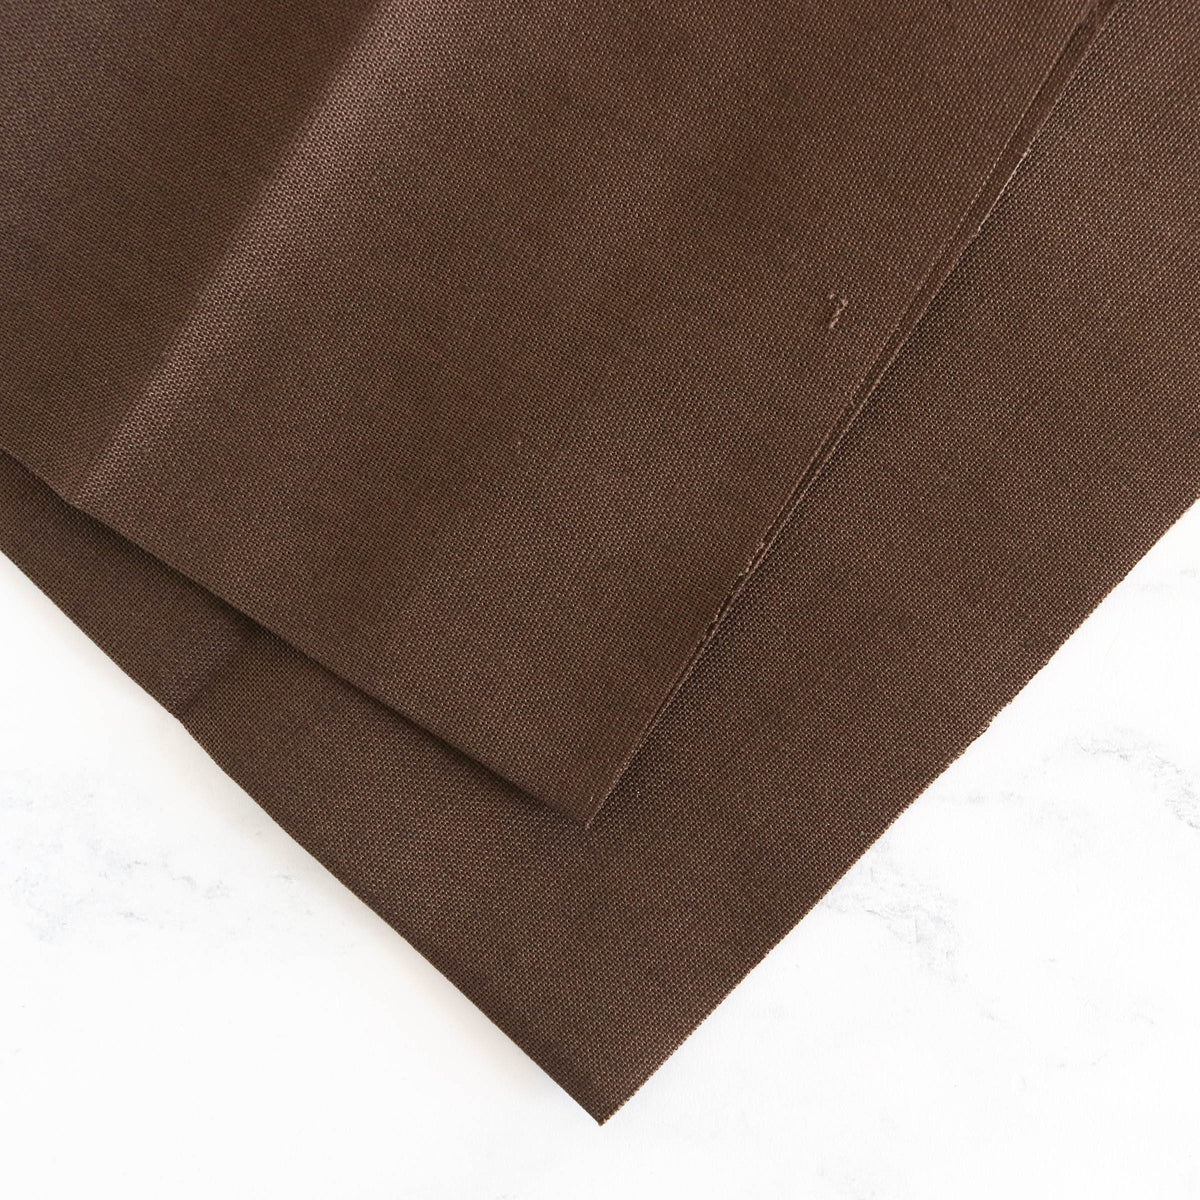 Cotton Hand Embroidery Fabric - Brown